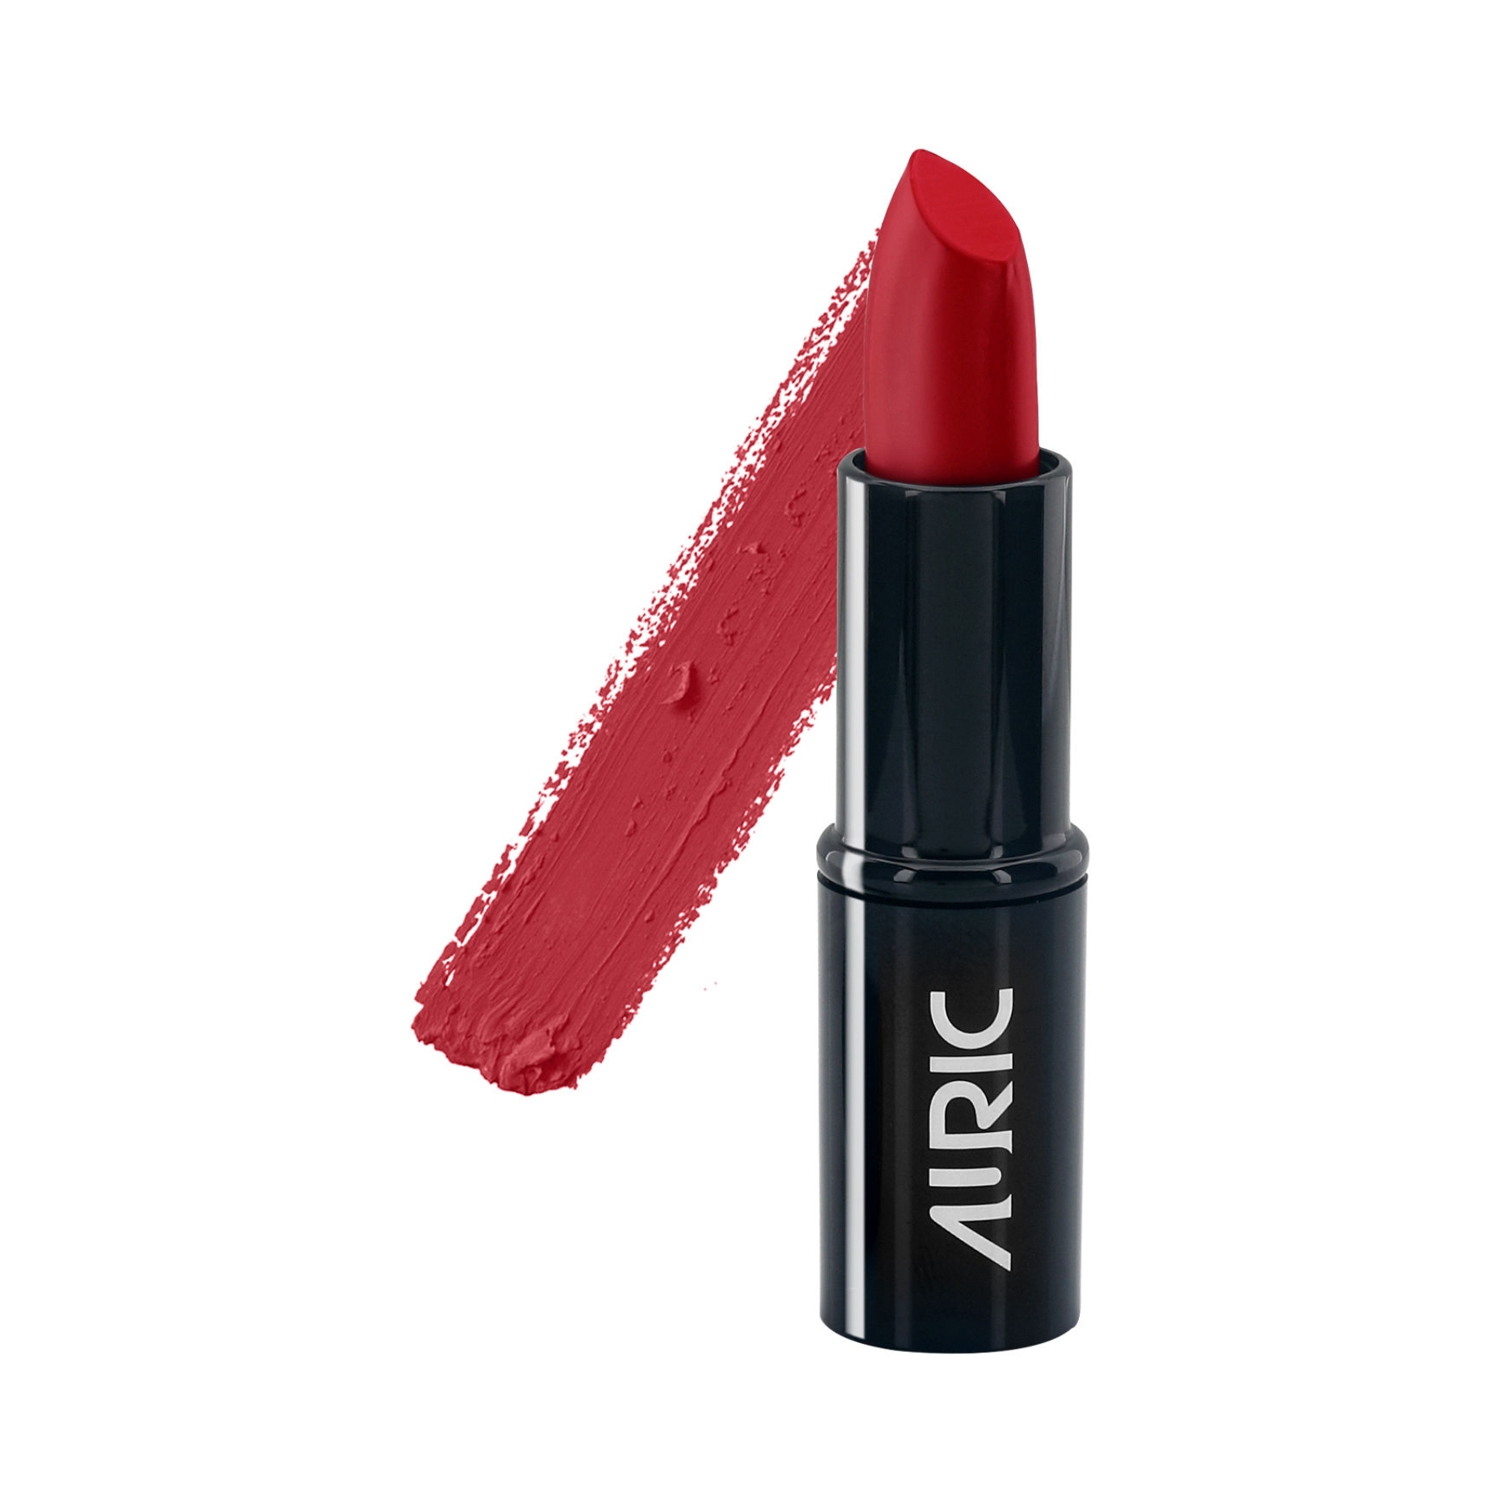 Auric | Auric Matte Creme Lipstick - 3203 Bloody Mary (4g)